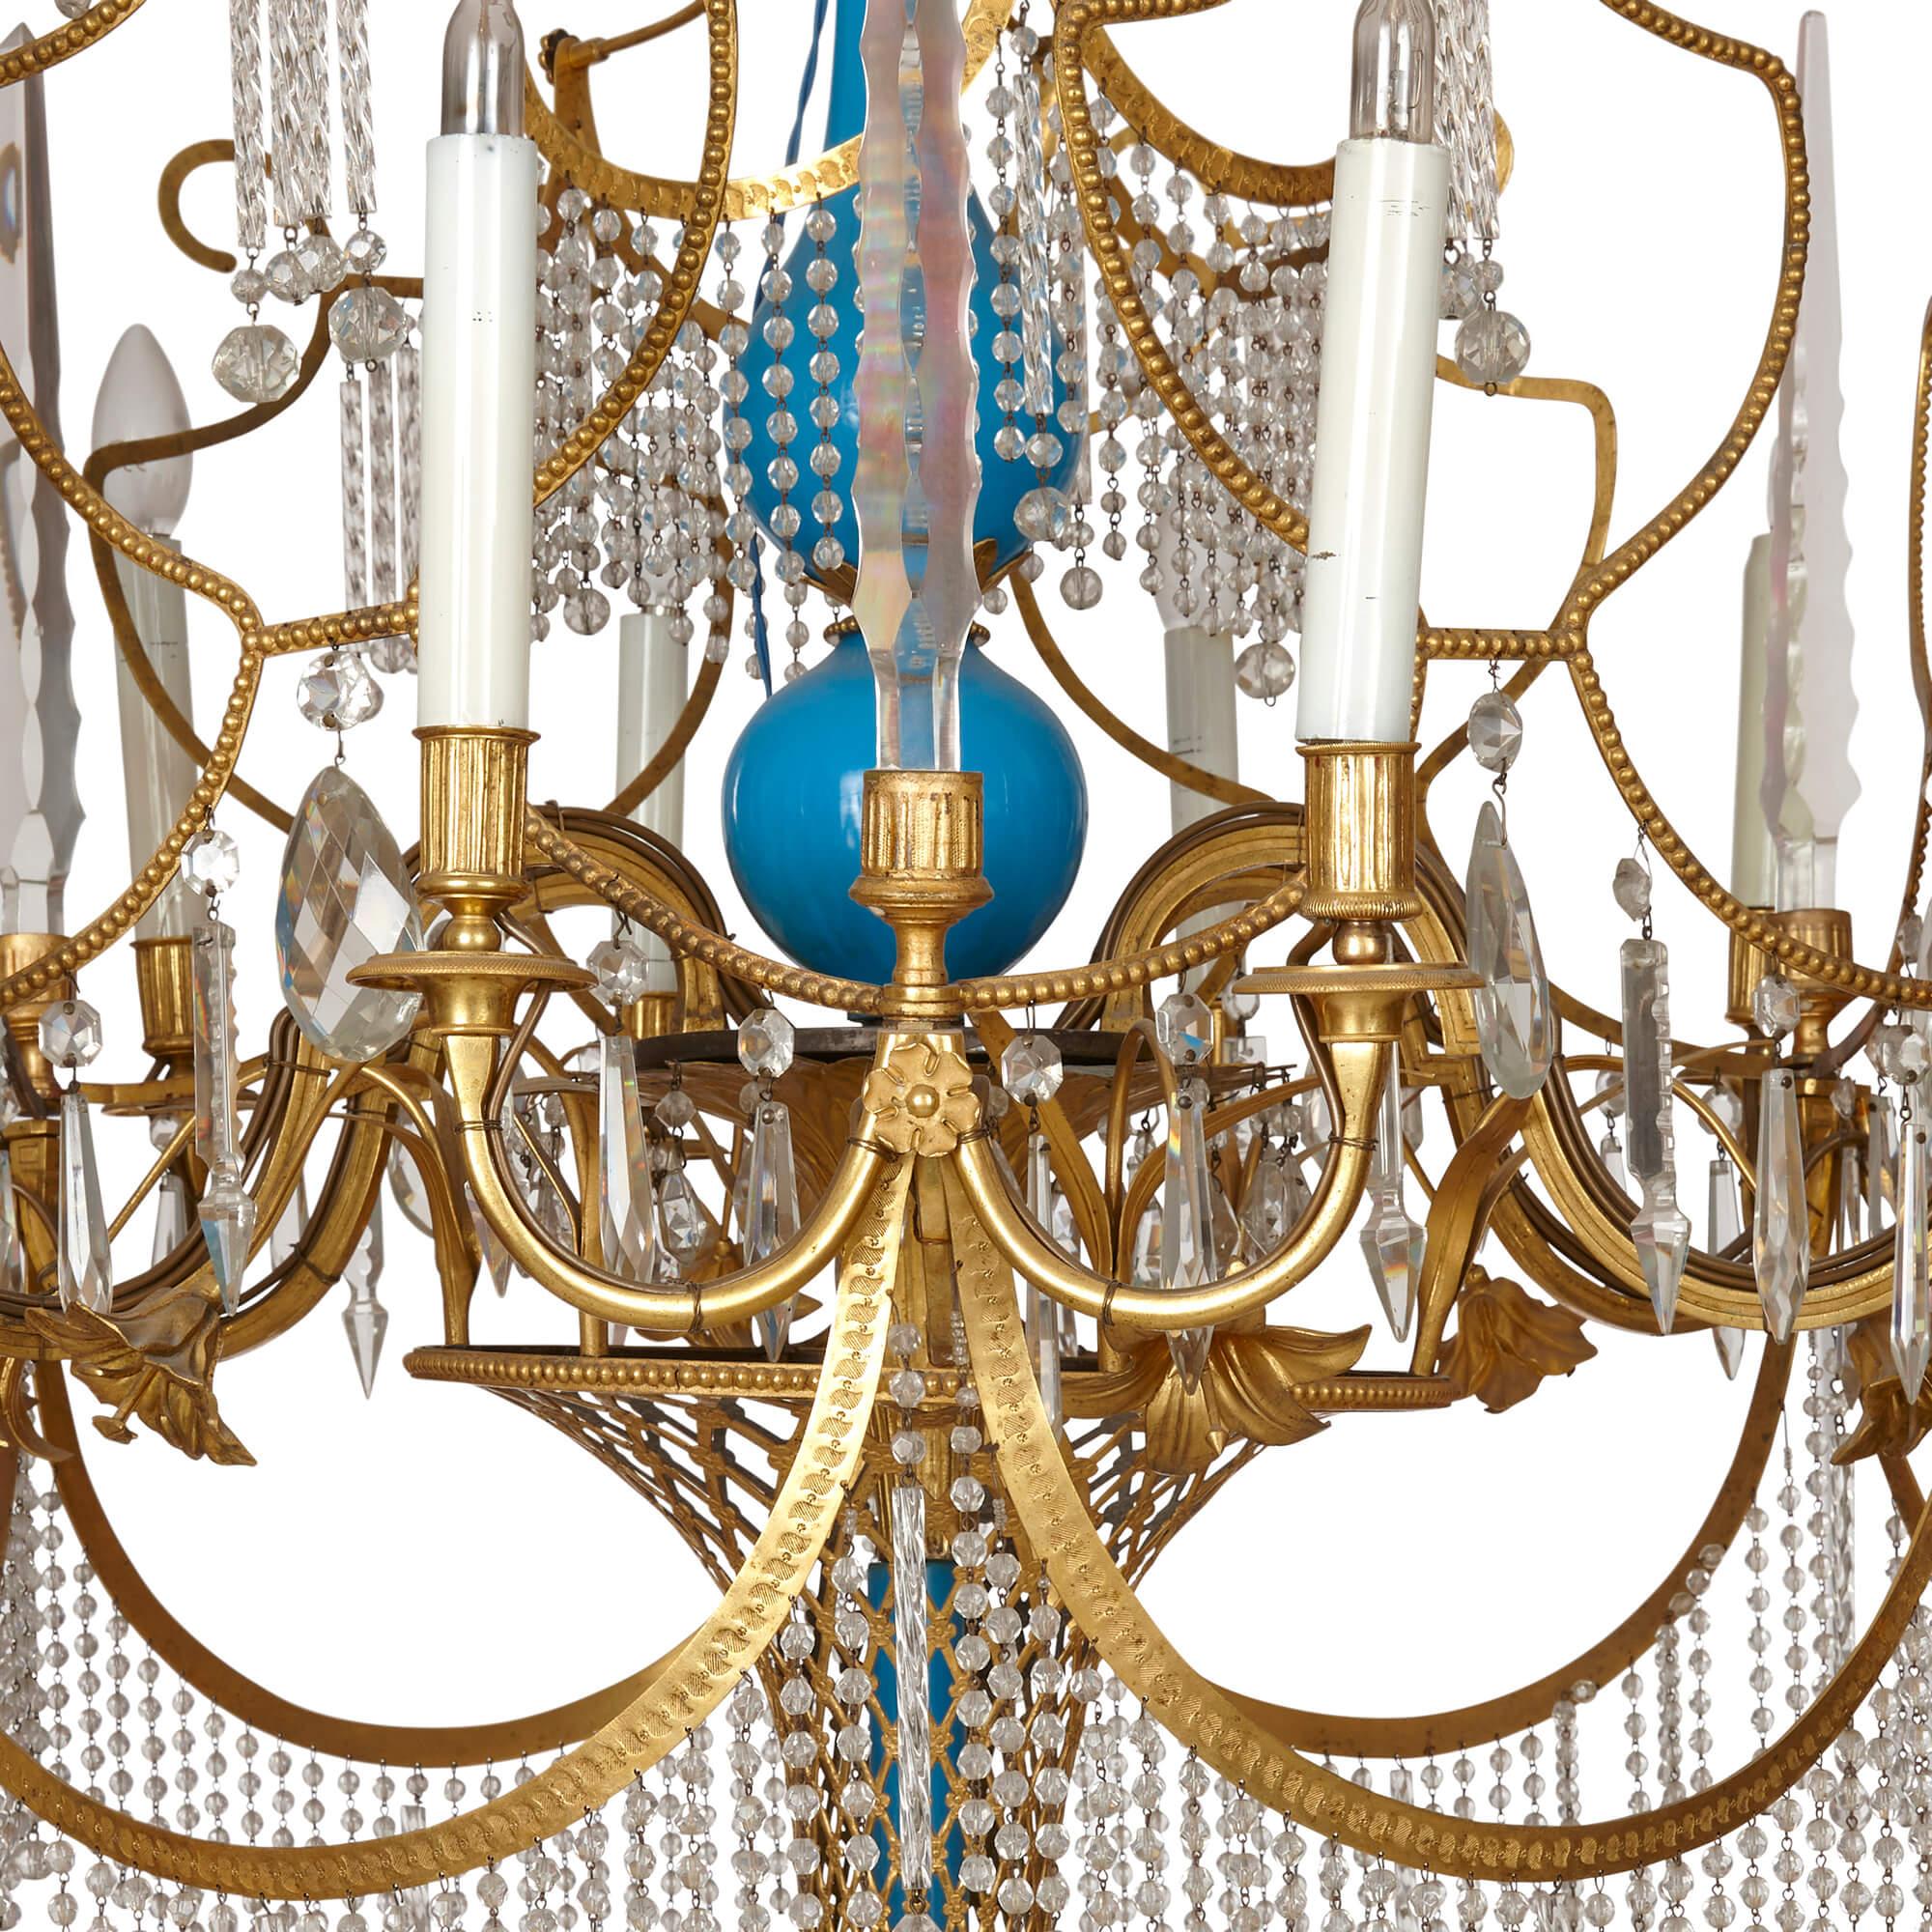 Russian cut-glass, ormolu, and blue porcelain chandelier
Russian, 19th Century
Height 120cm, diameter 90cm

This stunning Russian chandelier brings together vibrant turquoise porcelain, shining gilt bronze, and expertly cut glass in a remarkable